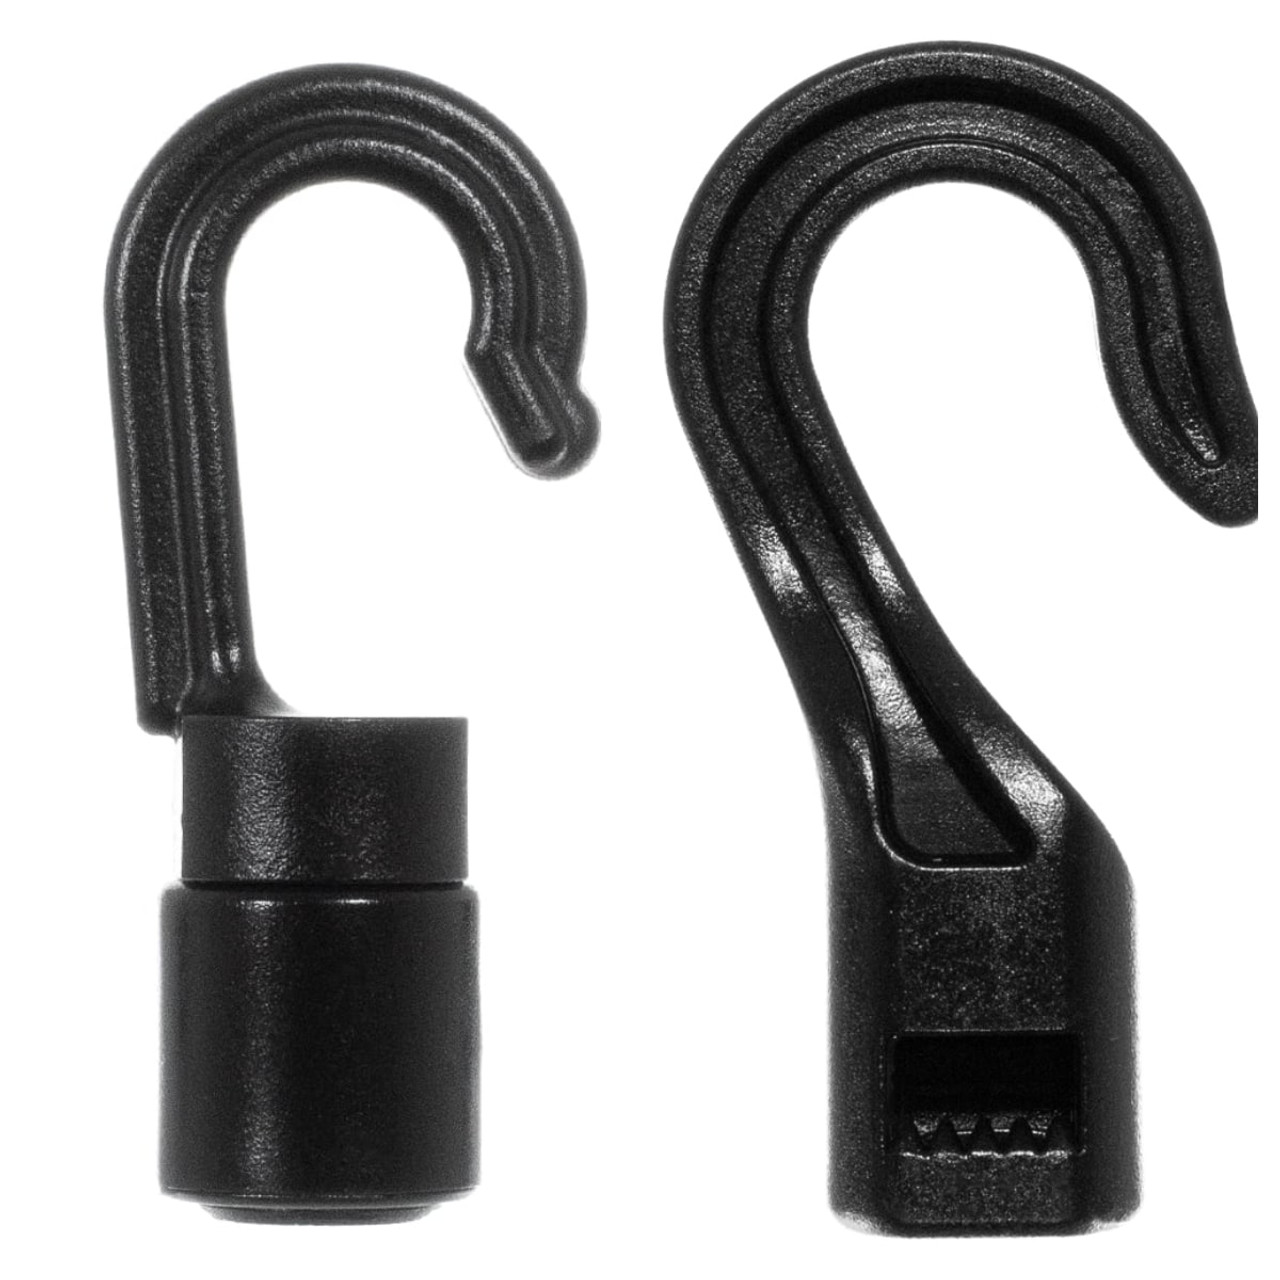 Black Hard Plastic Cord End Hooks with Open, Non-Locking Closure (5 Pack)